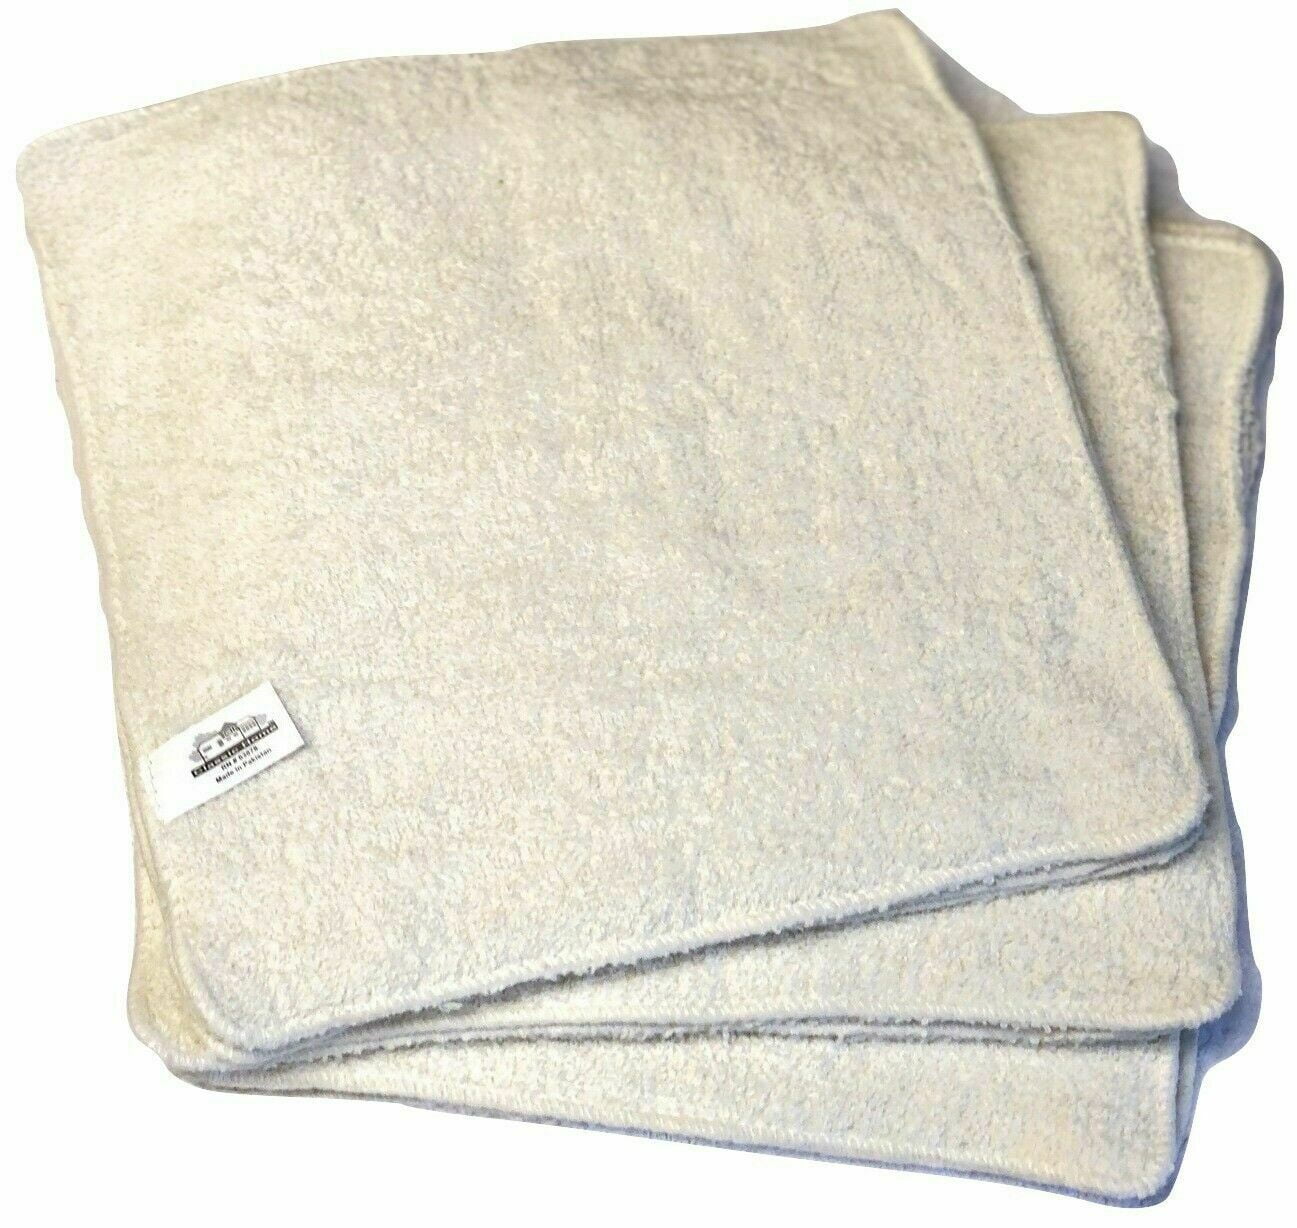 24 Pack Washcloth 12x12 Baby Towel Face Cloth 100% Cotton 